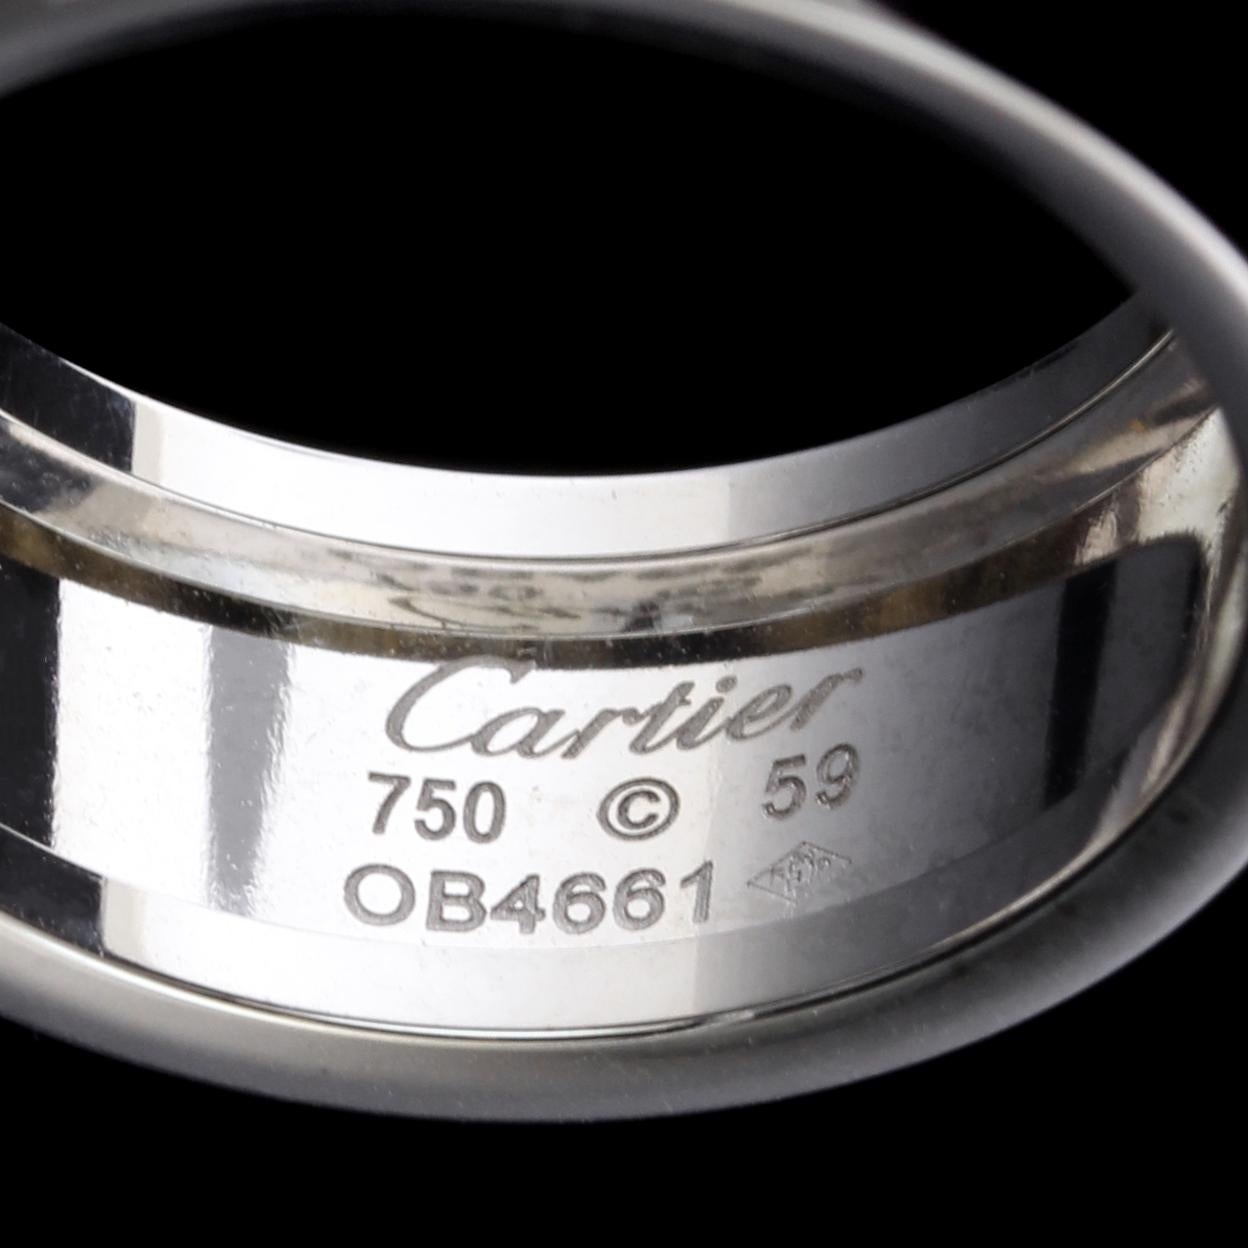 Cartier 18K White Gold Diamond Love Ring. The 10.00mm. wide ring is set with six full cut diamonds, #OB 4661, size 59, US 8 3/4, with original box.